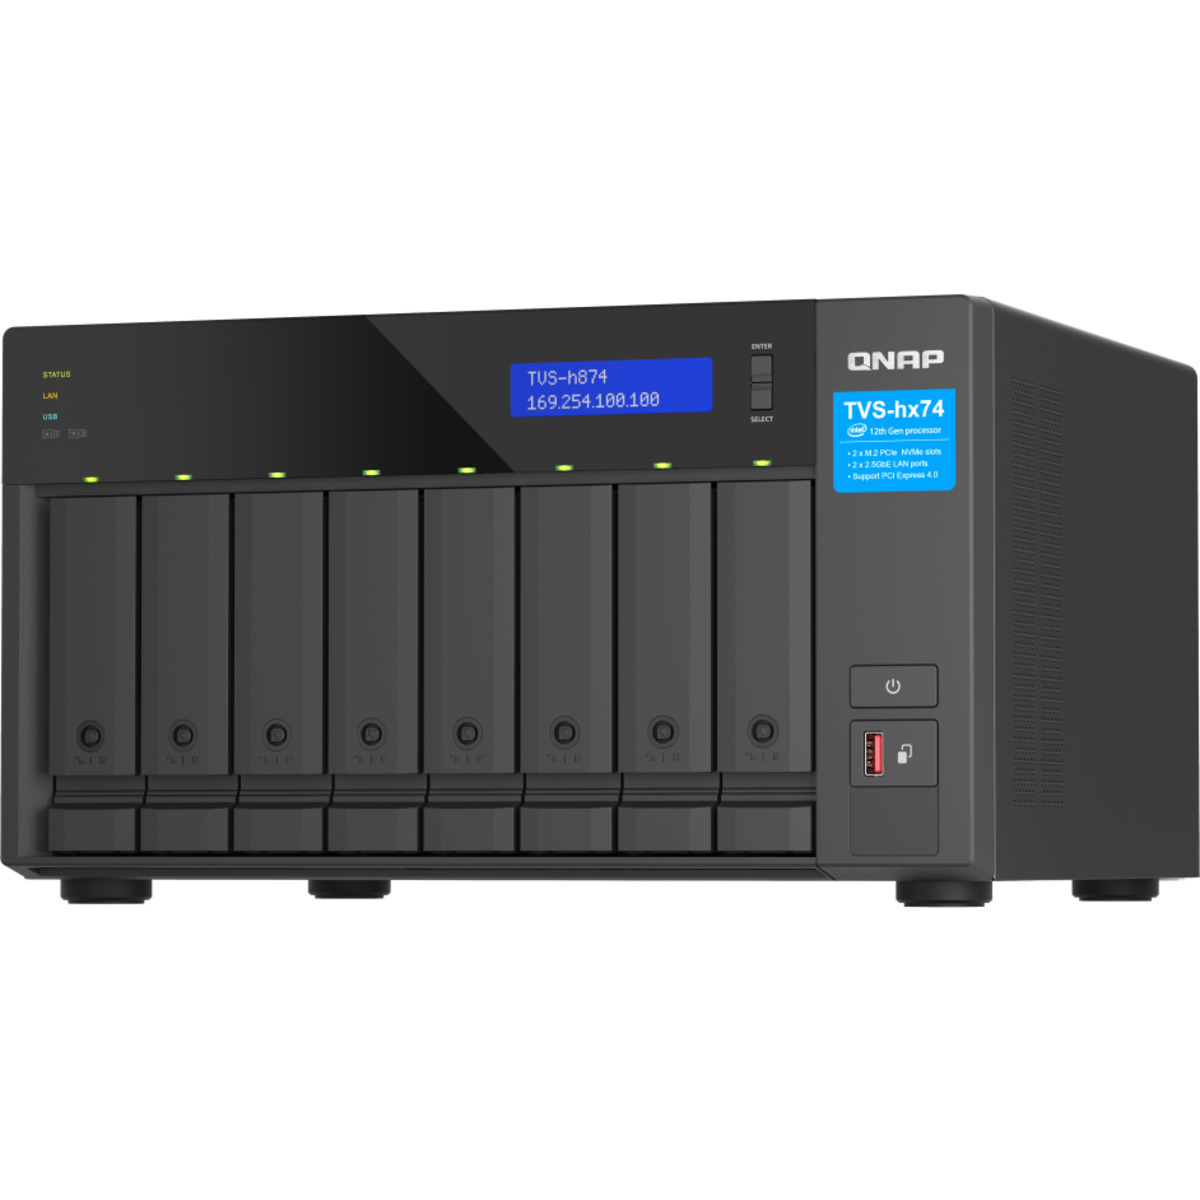 buy QNAP TVS-h874 Core i7 Desktop NAS - Network Attached Storage Device Burn-In Tested Configurations - nas headquarters buy network attached storage server device das new raid-5 free shipping usa TVS-h874 Core i7